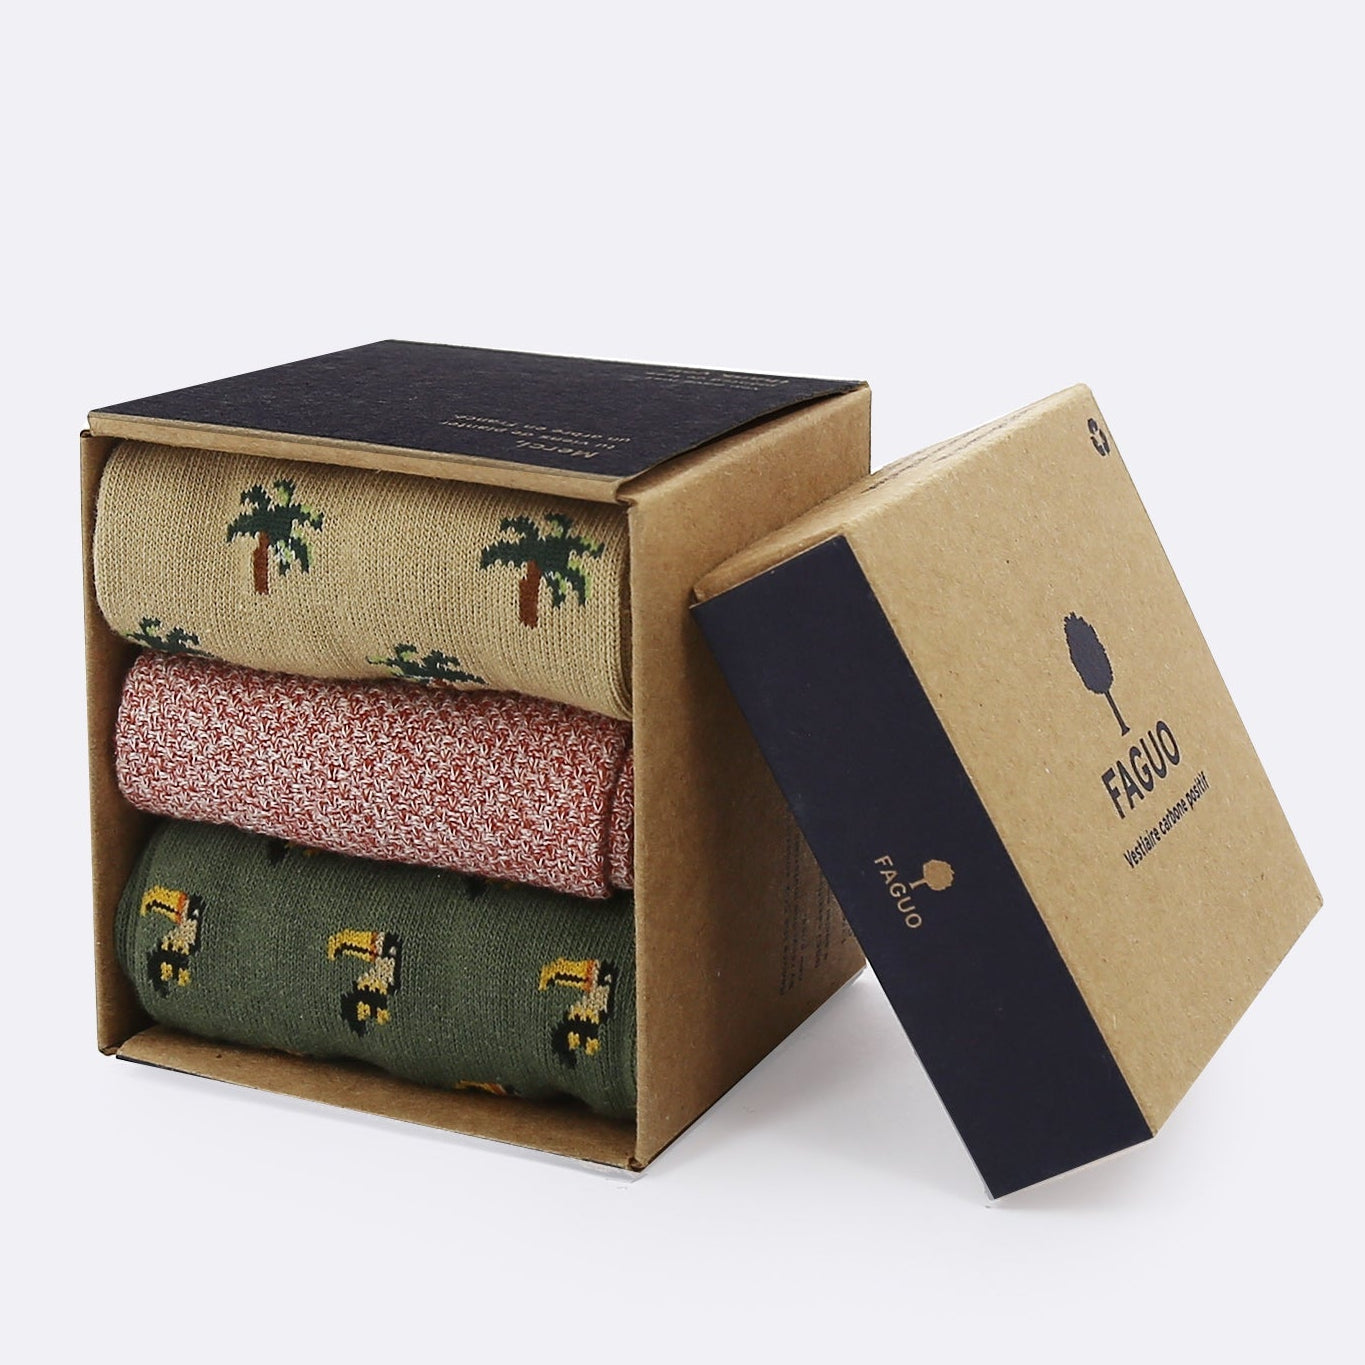 Faguo - Set of 3X Socks - Sand and Kaki with Bird and Palm Trees - The Good Chic